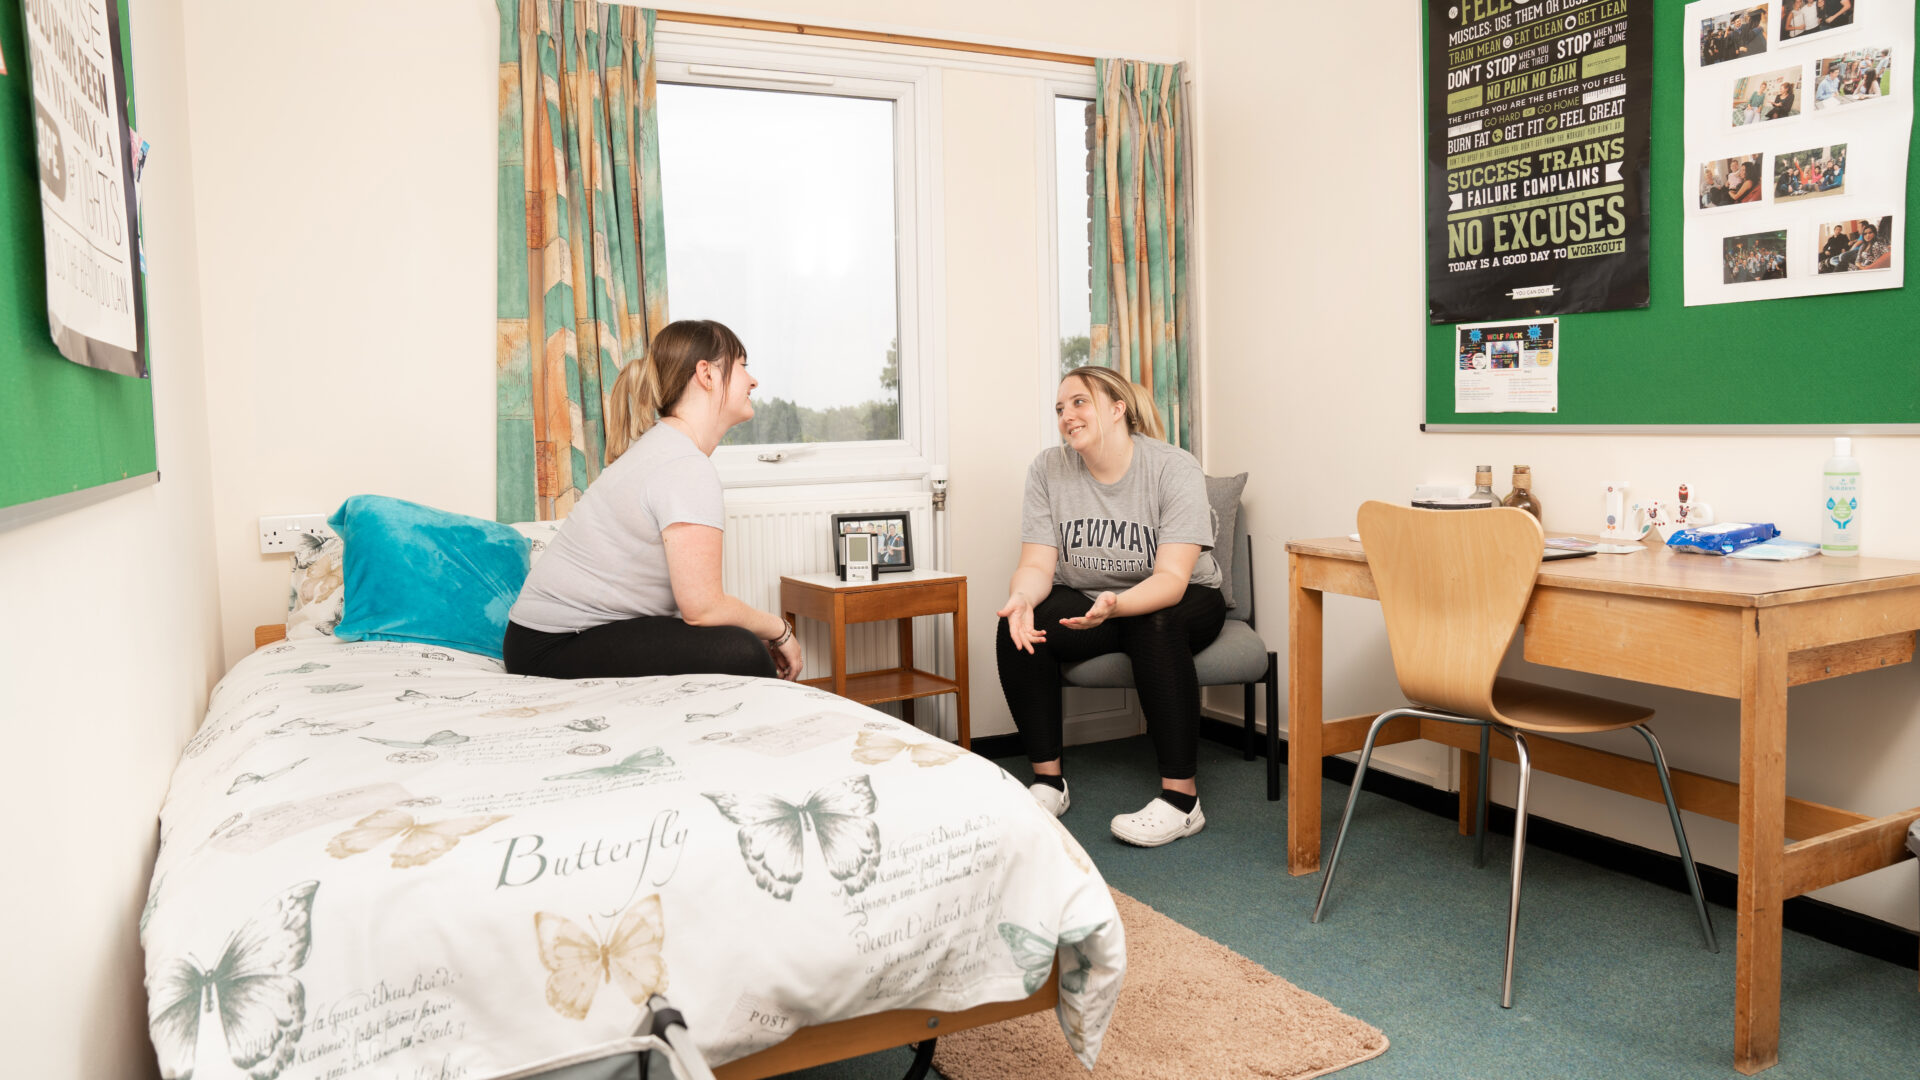 Students in the Oxford Halls accommodation